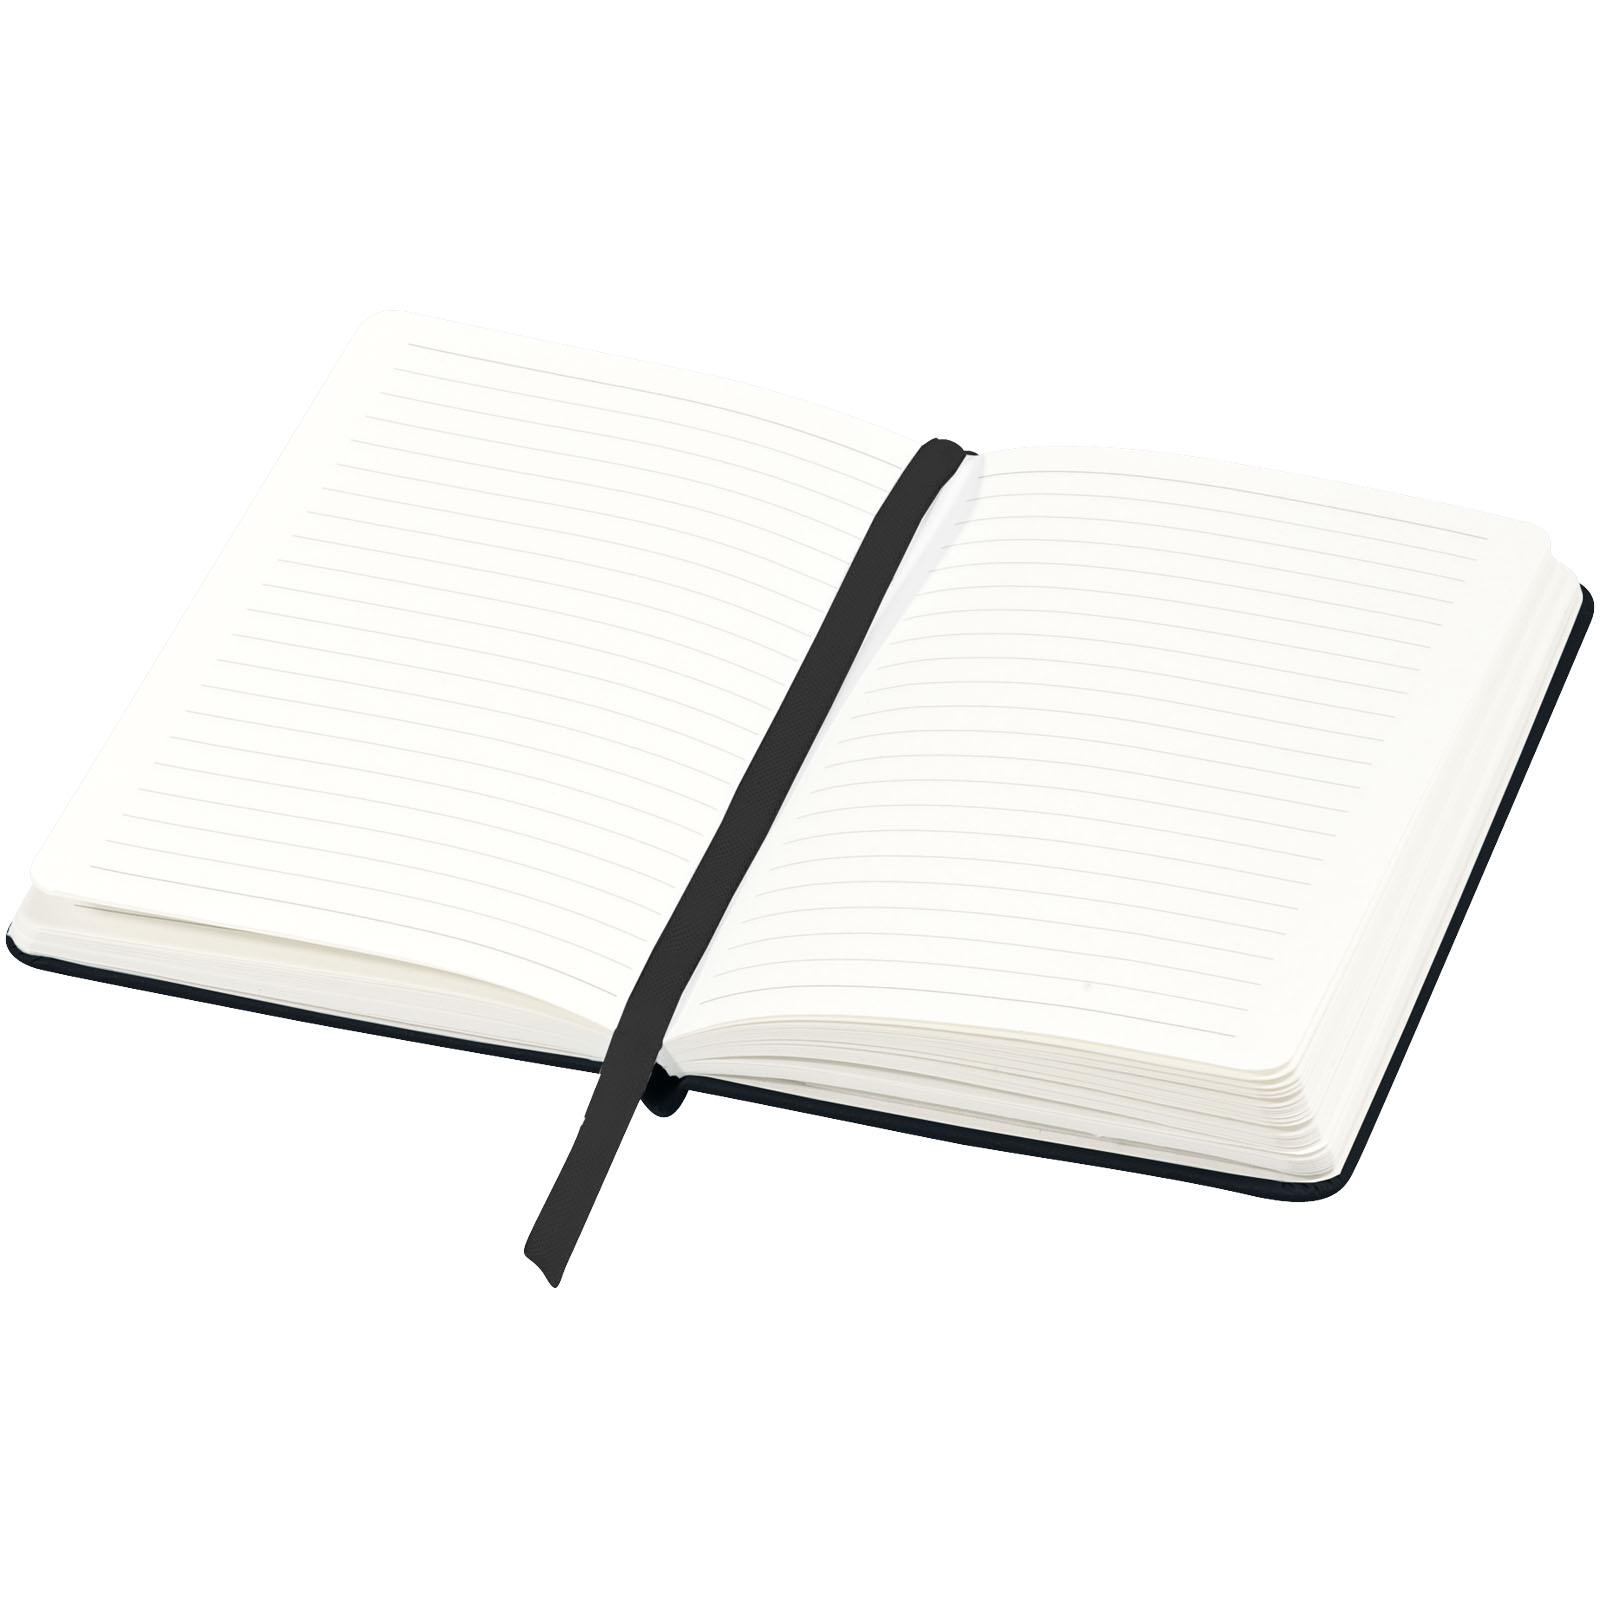 Advertising Hard cover notebooks - Classic A6 hard cover pocket notebook - 4